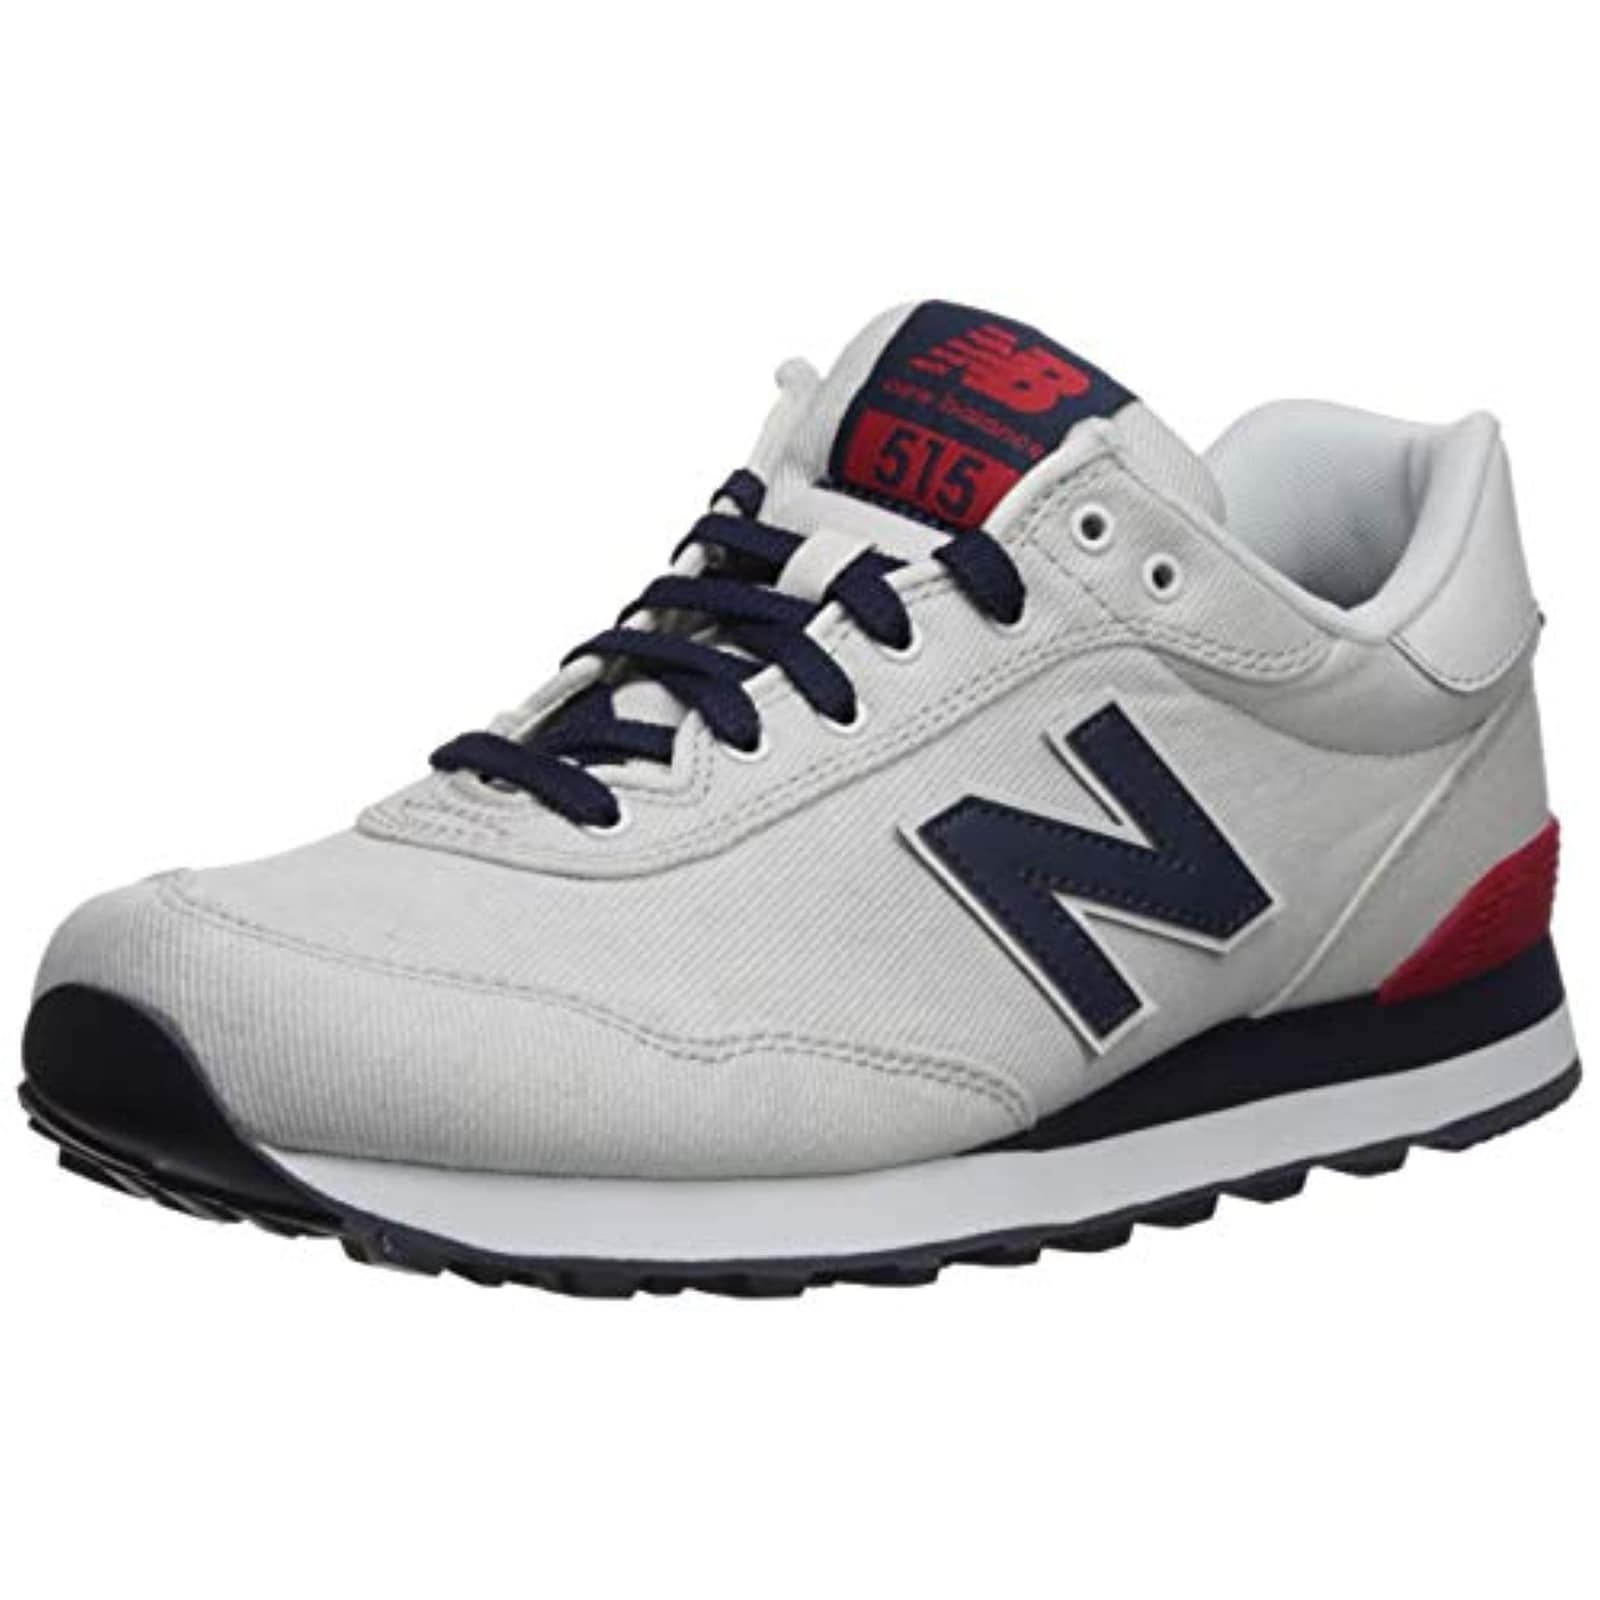 red new balance shoes mens